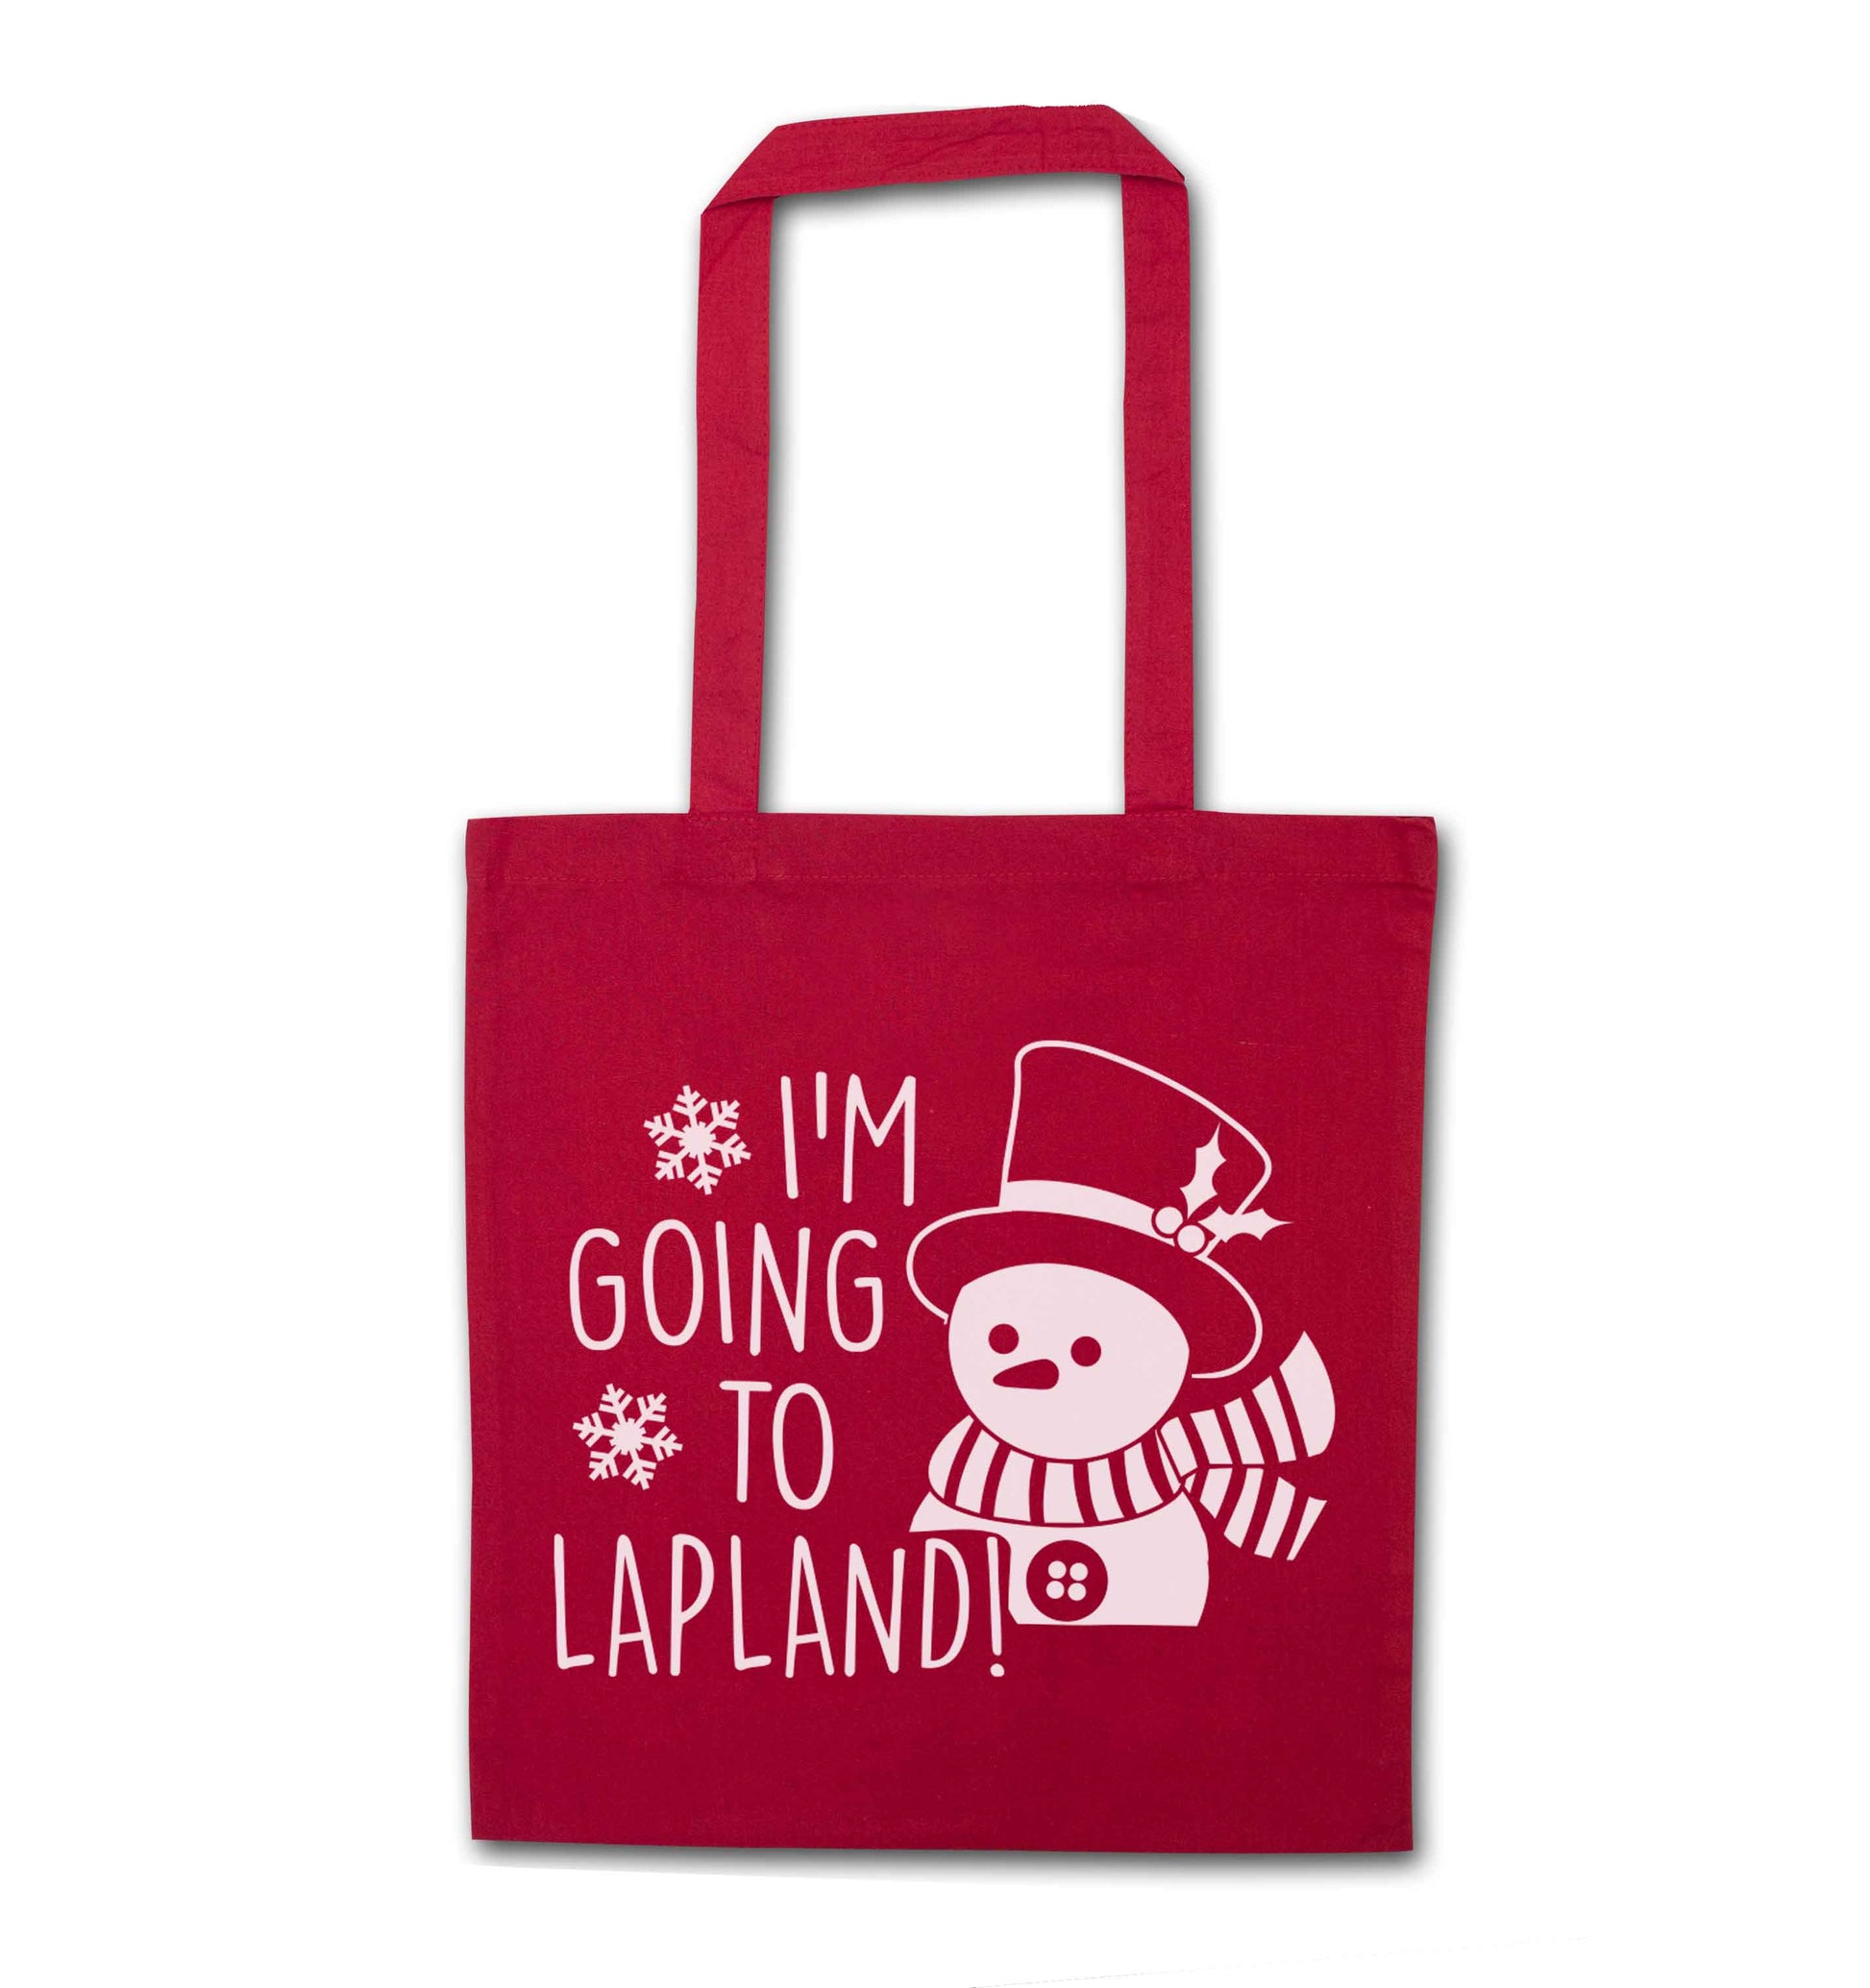 I'm going to Lapland red tote bag